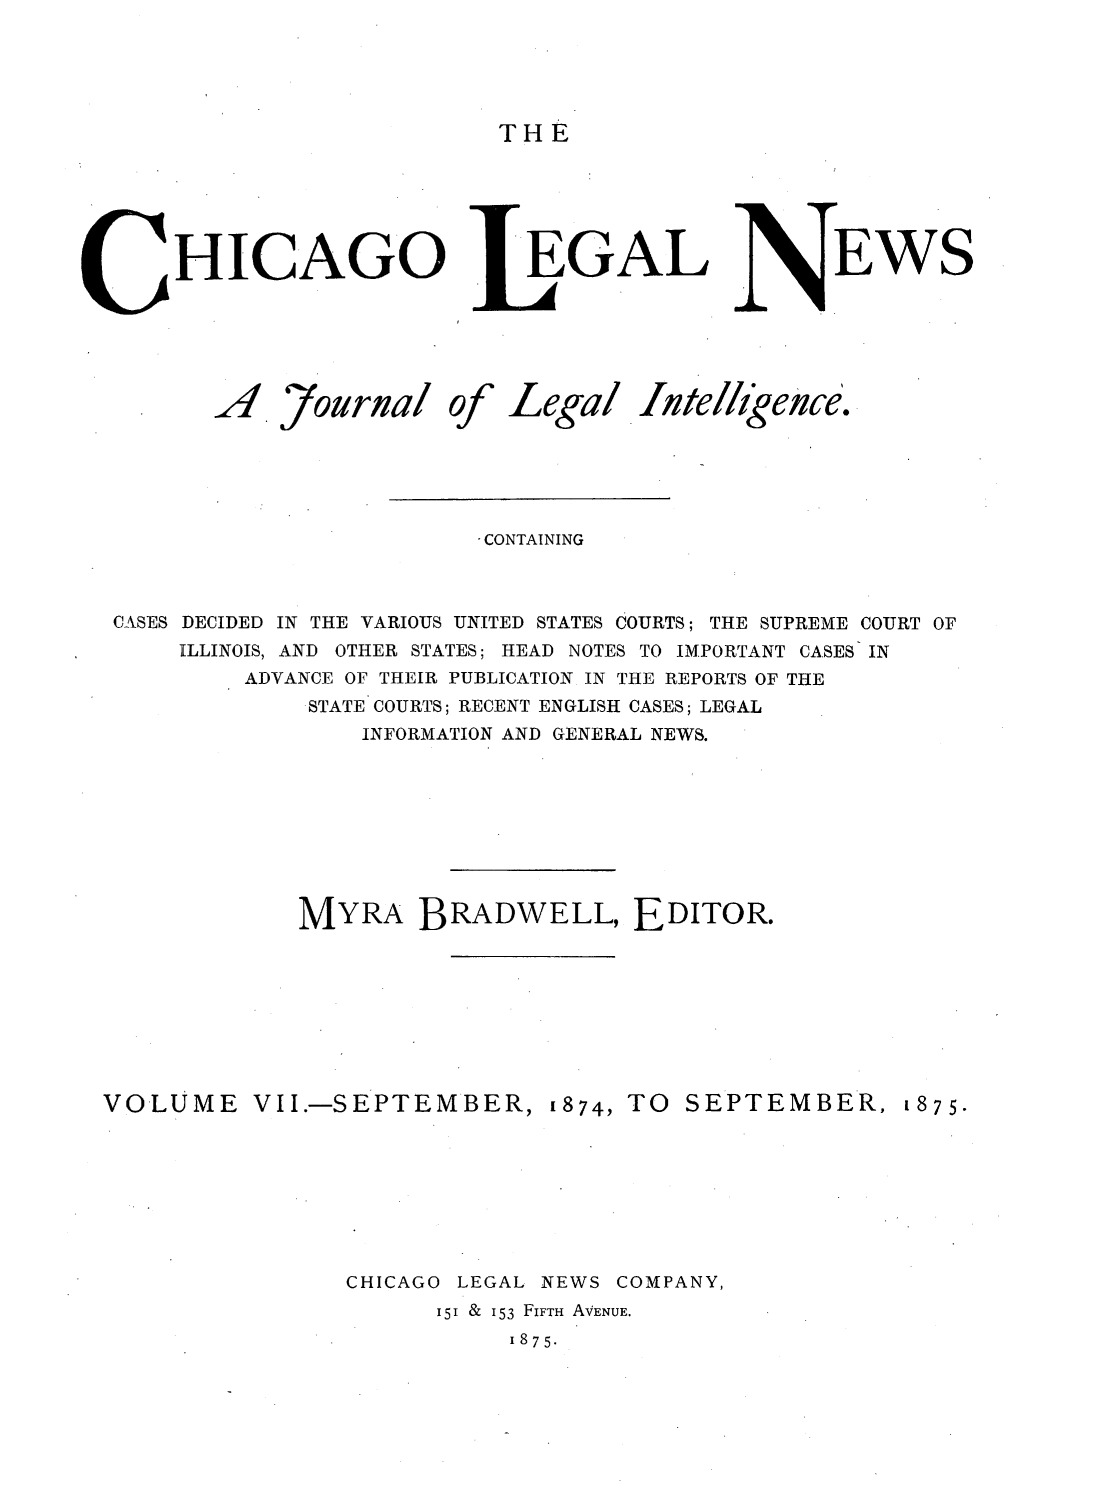 handle is hein.journals/chiclene7 and id is 1 raw text is: THEHICAGOA ,7ournalofLeGALLegal Ate,/igence.CONTAININGCASES DECIDED IN THE VARIOUS UNITED STATES COURTS; THE SUPREME COURT OFILLINOIS, AND OTHER STATES; HEAD NOTES TO IMPORTANT CASES INADVANCE OF THEIR PUBLICATION IN THE REPORTS OF THESTATE COURTS; RECENT ENGLISH CASES; LEGALINFORMATION AND GENERAL NEWS.MYRA BRADWELL, EDITOR.VOLUMEVII.-SEPTEMBER, 1874, TOSEPTEMBER, 1875.CHICAGOLEGAL NEWS COMPANY,151 & 153 FIFTH AVENUE.1875.EWS